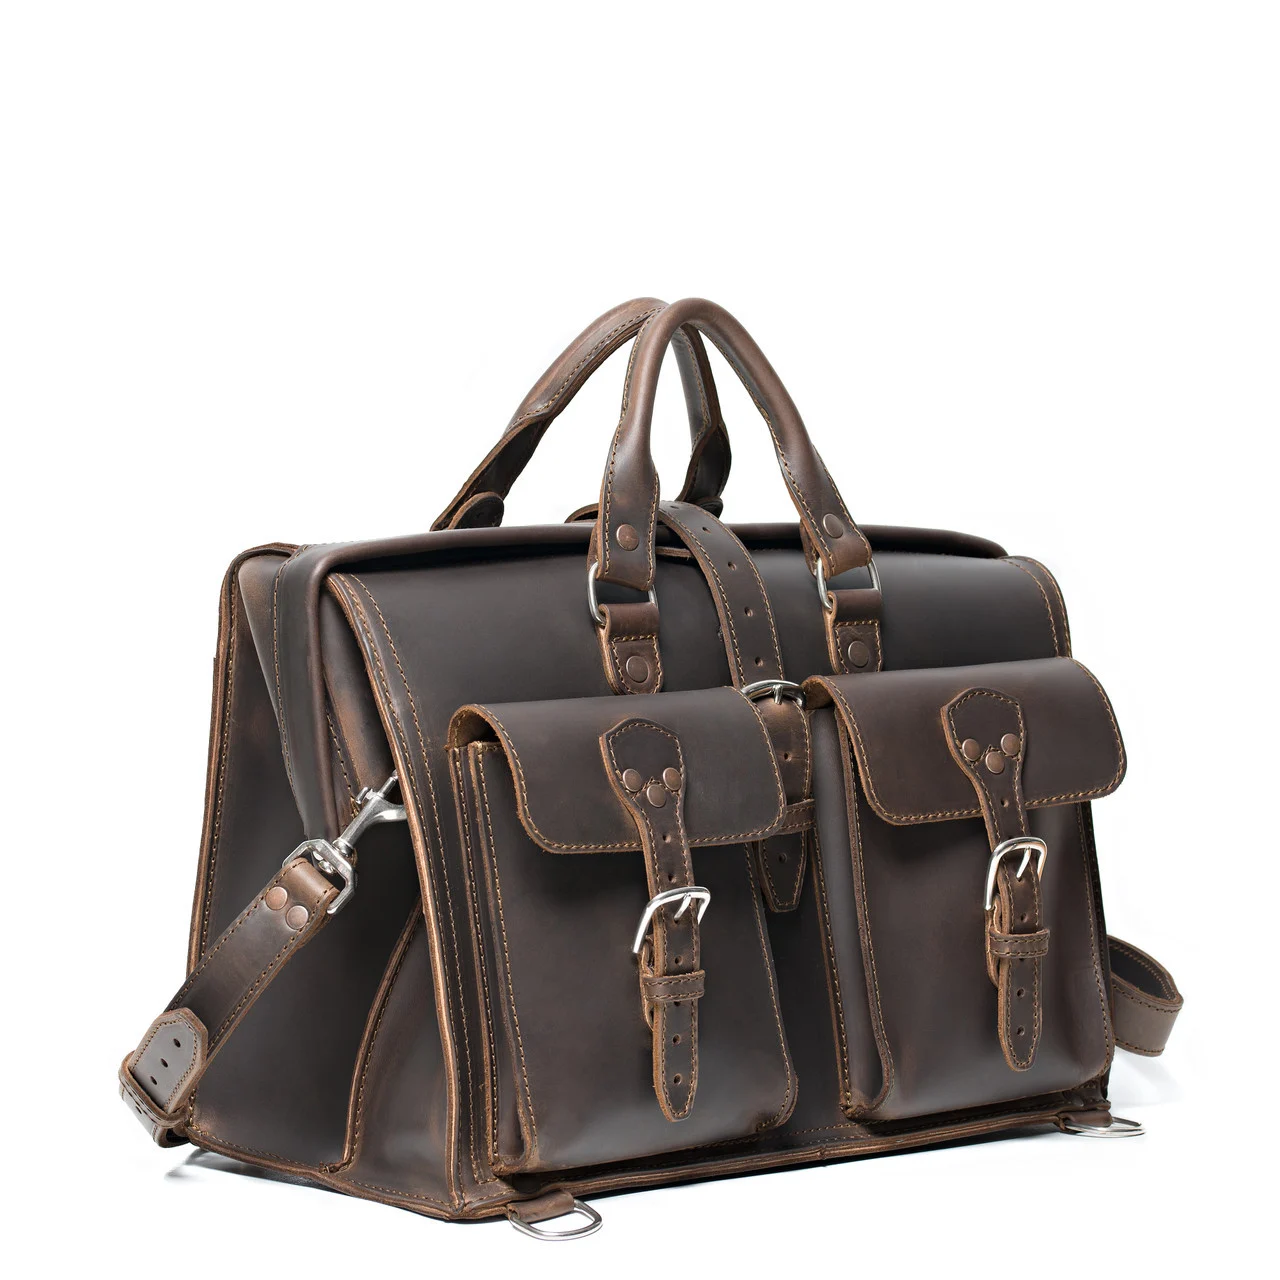 Barrister’s Briefcase from Saddleback Leather Company.